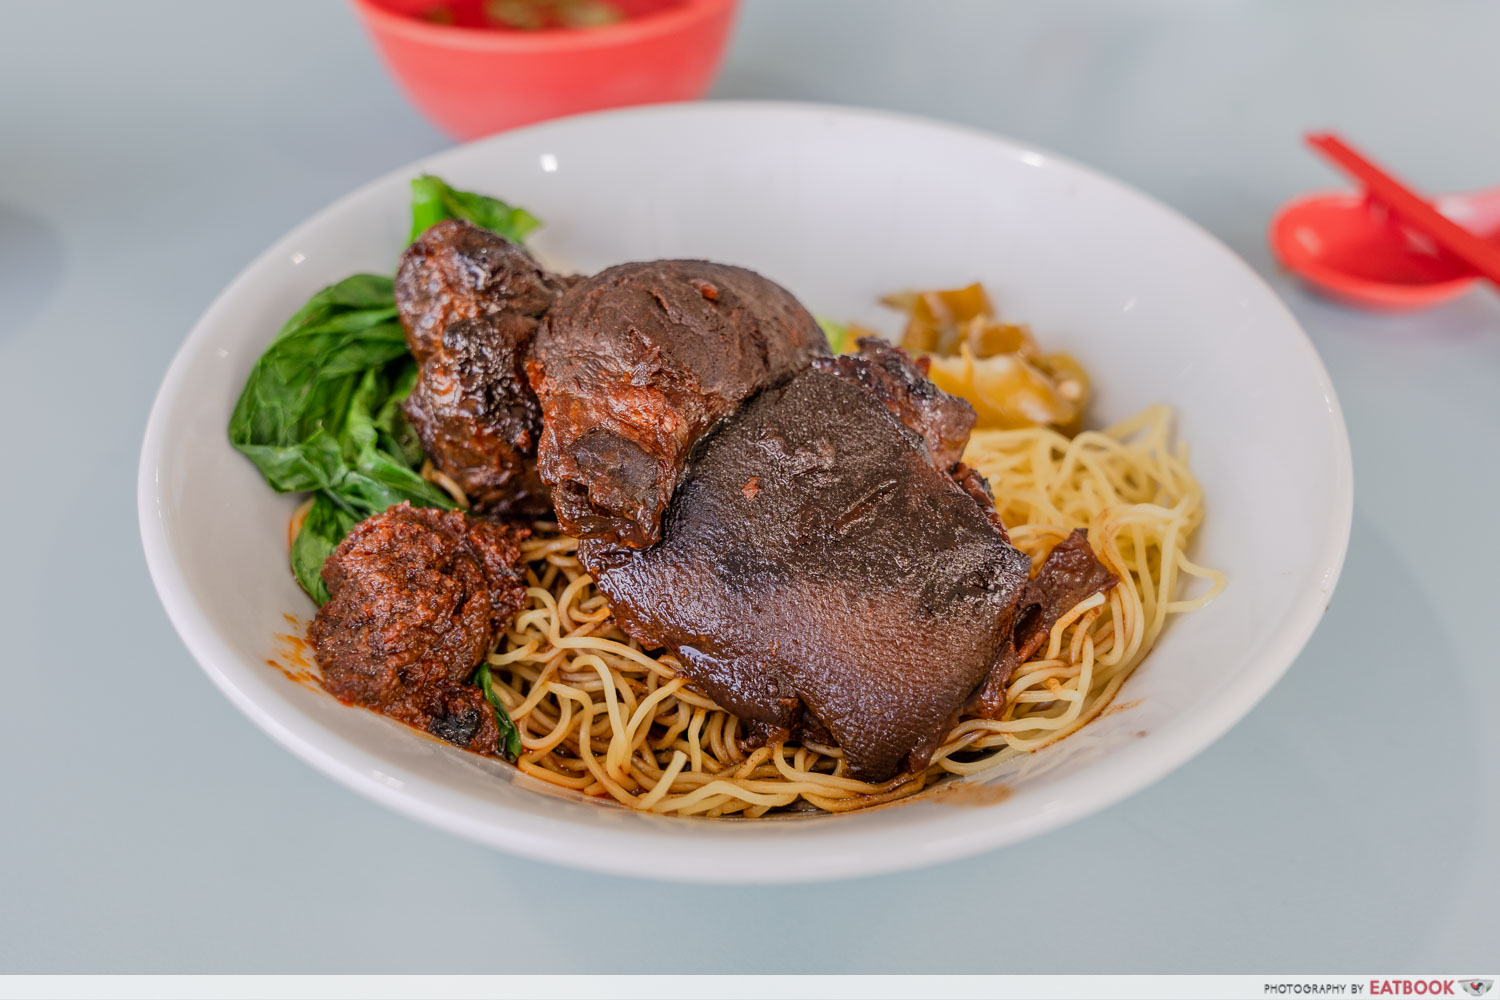 lao jie fang - beef brisket and tendon noodles